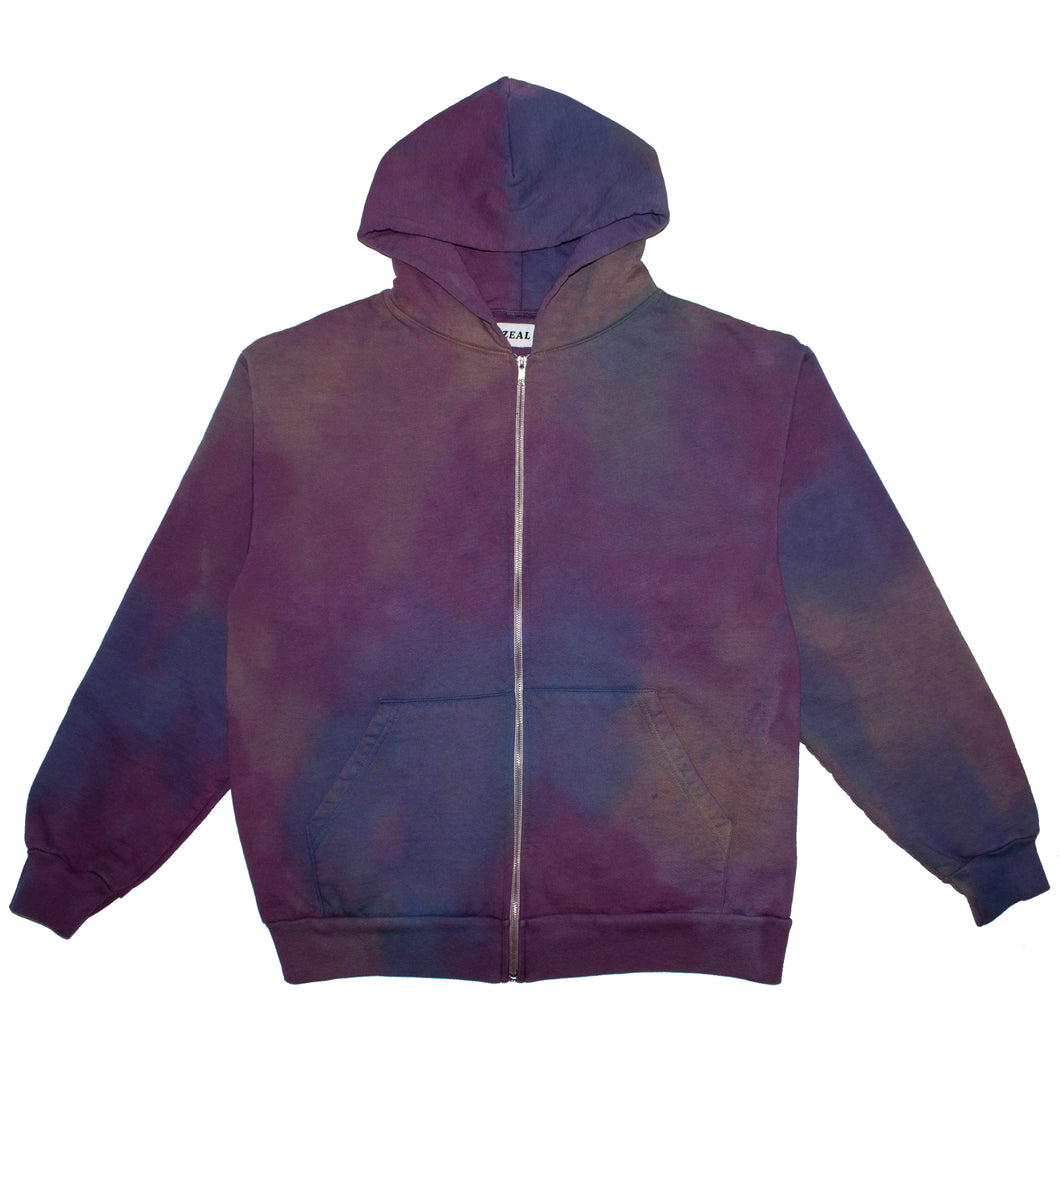 Hand Dyed Multi Color Zip-Up Hoodie - Large